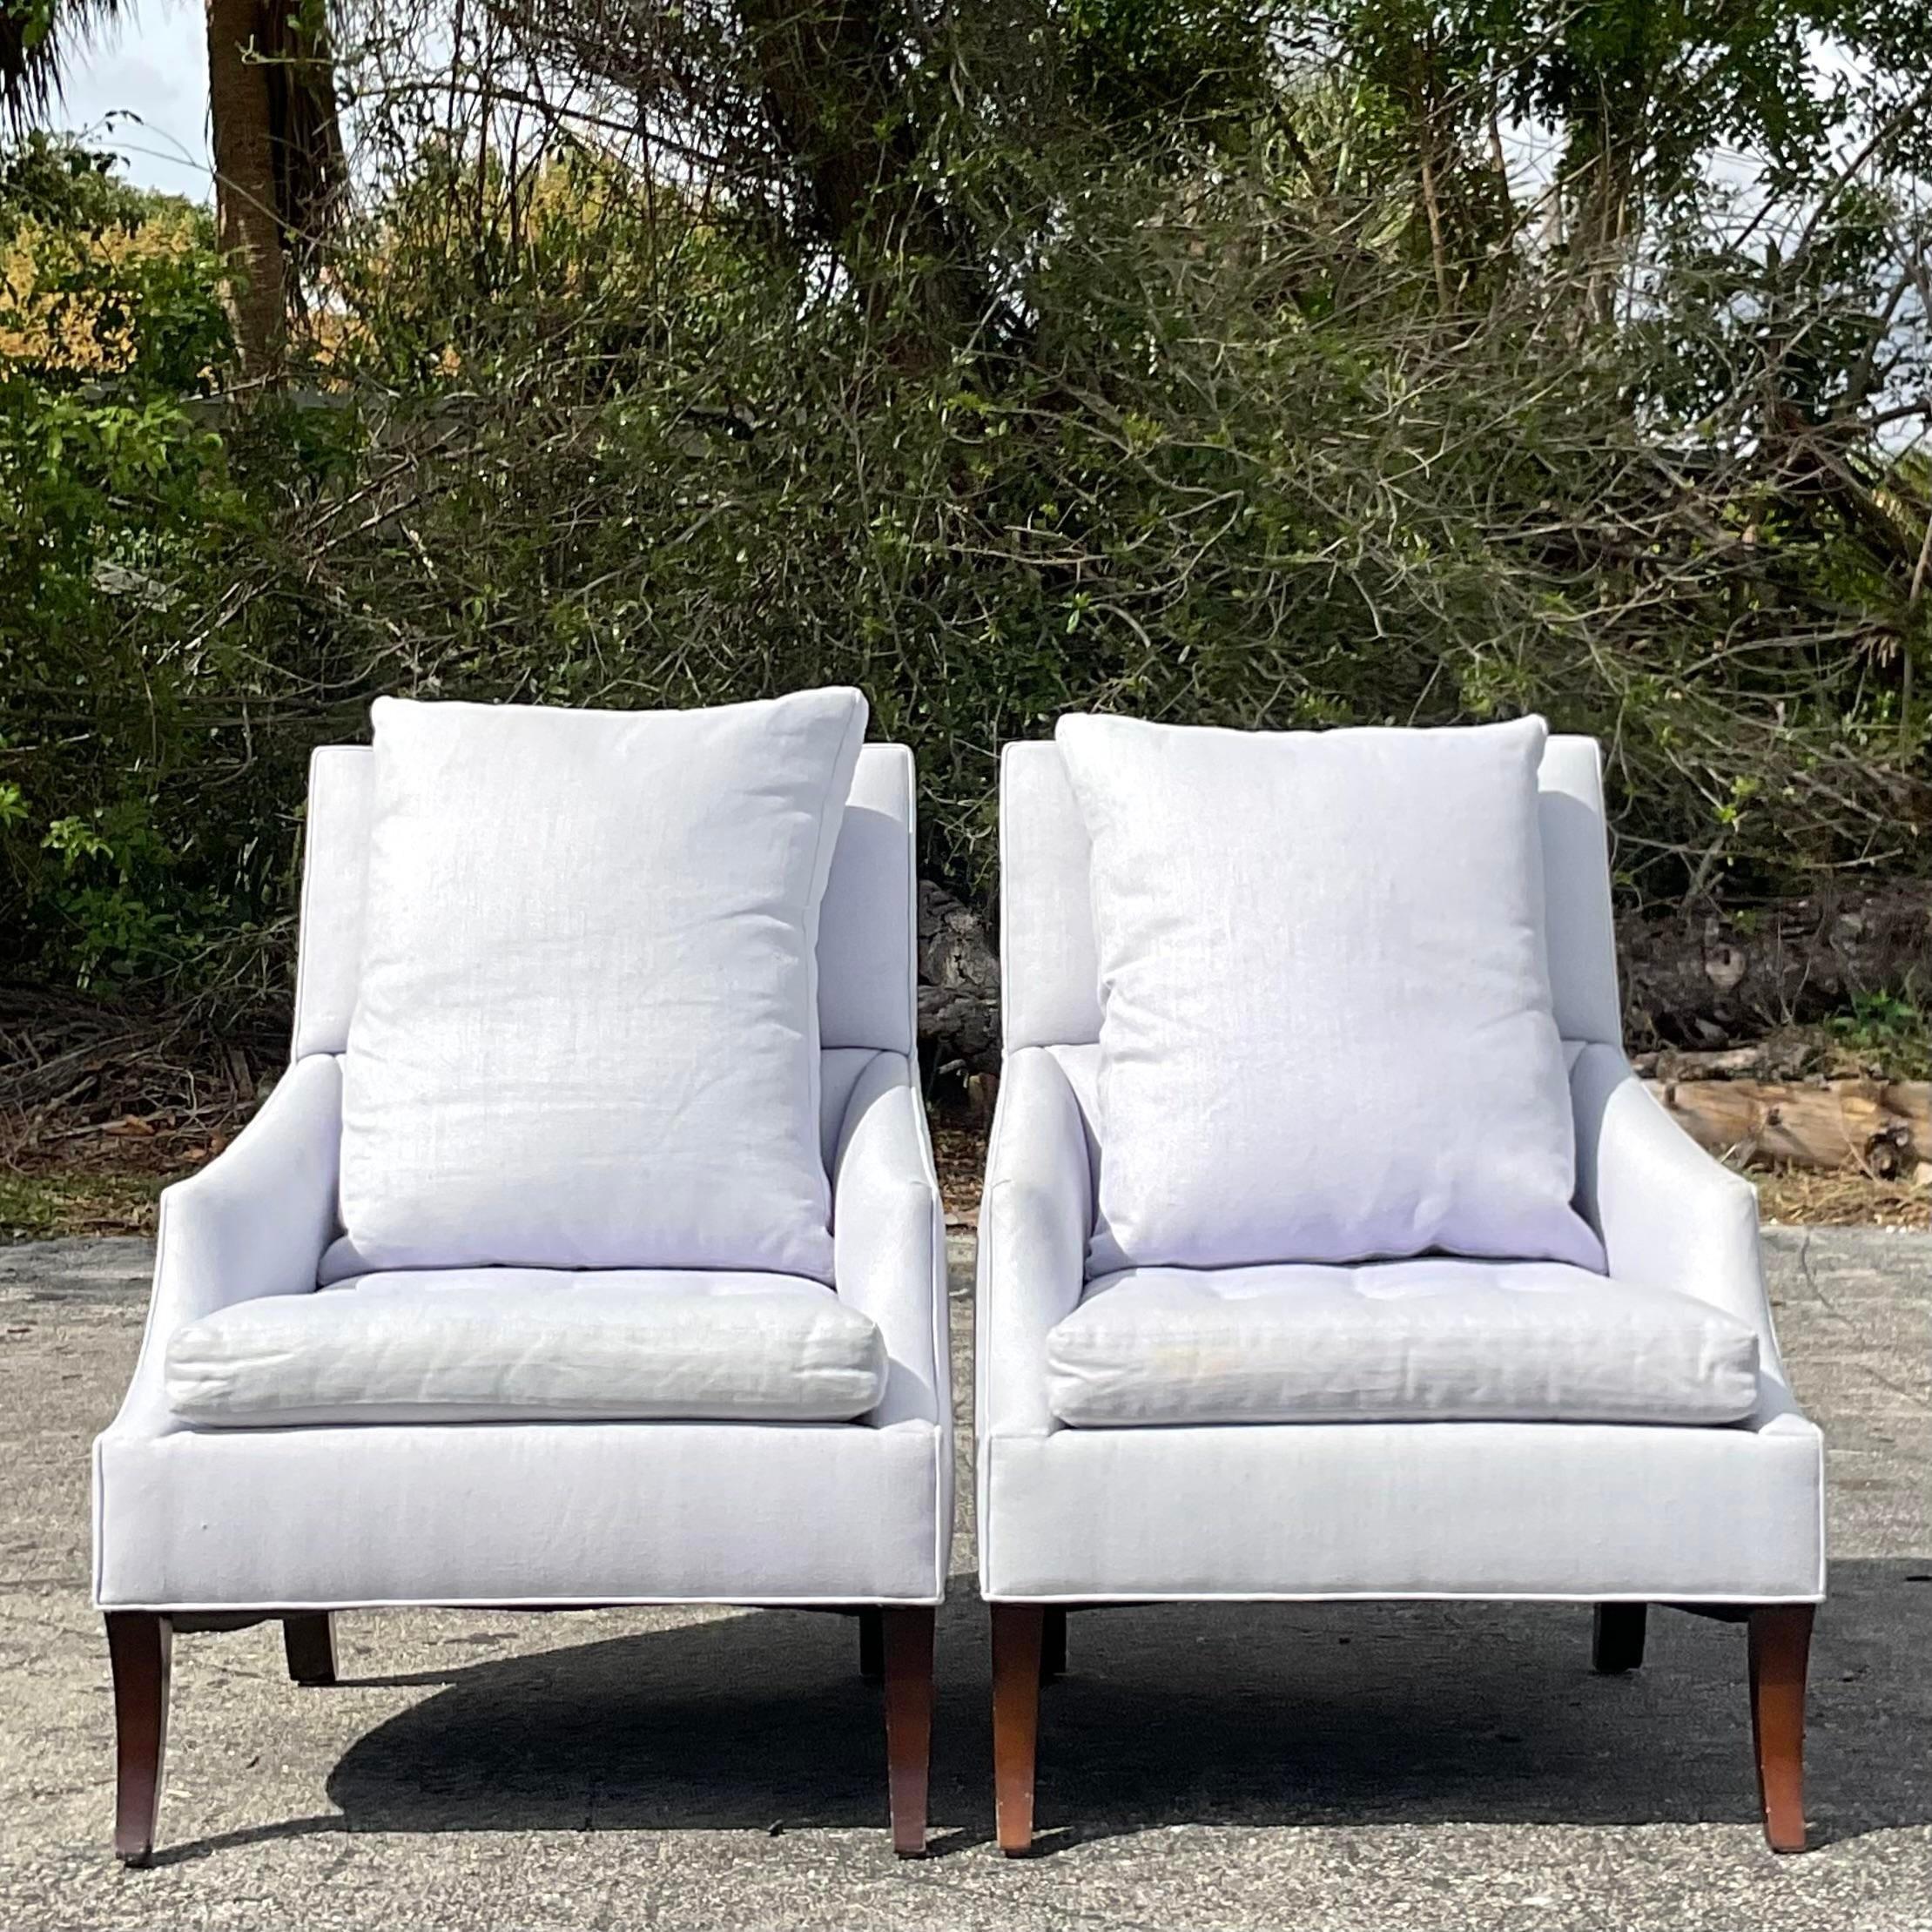 Contemporary Vintage Boho R. Jones Lounge Chairs - a Pair For Sale